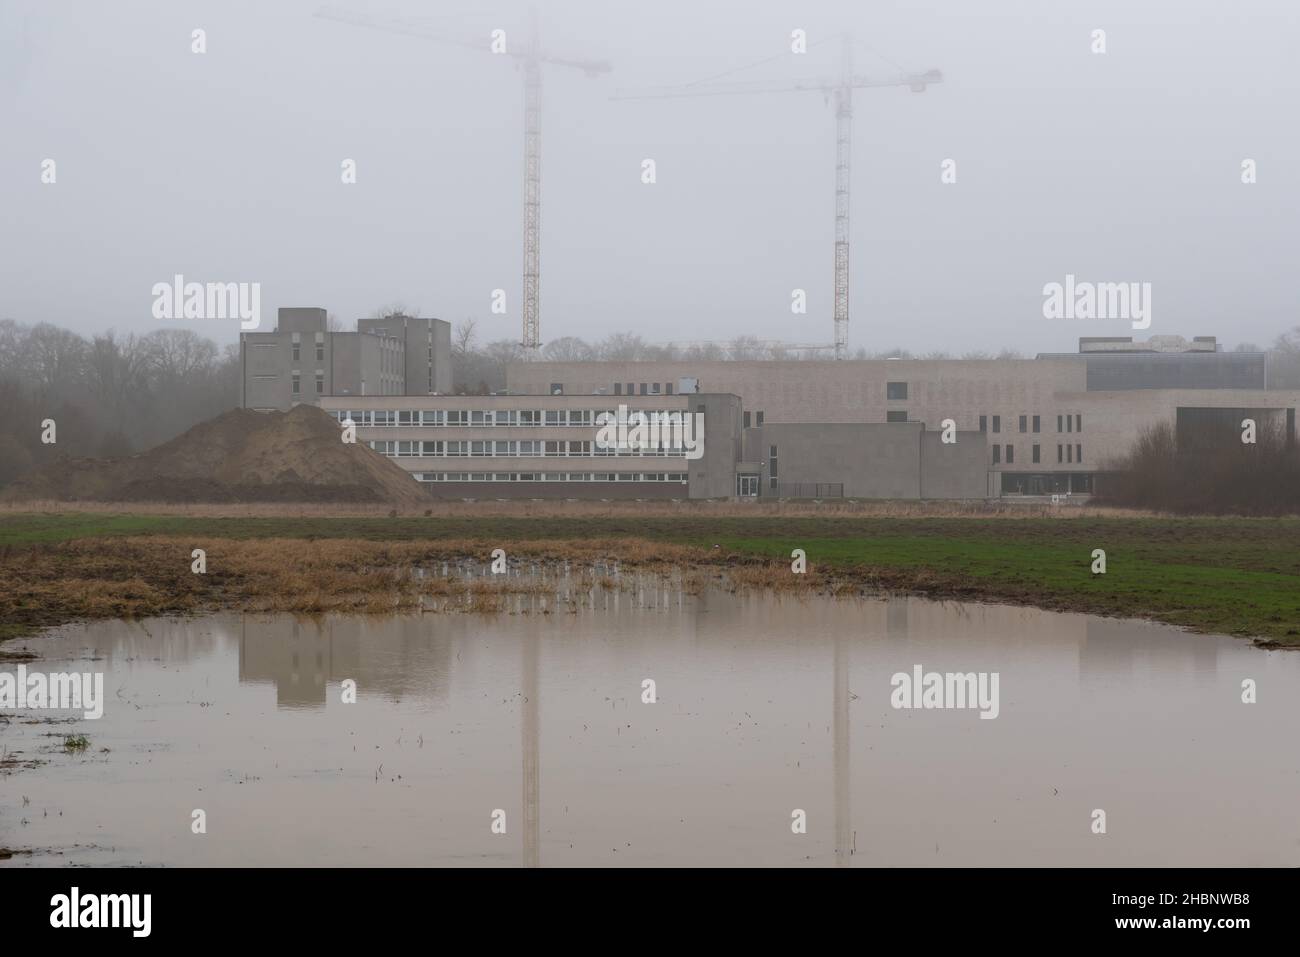 Heverlee, Flanders, Belgium, 12 18 2021: Campus buildings of the Catholic University of Leuven, reflecting in a pond Stock Photo